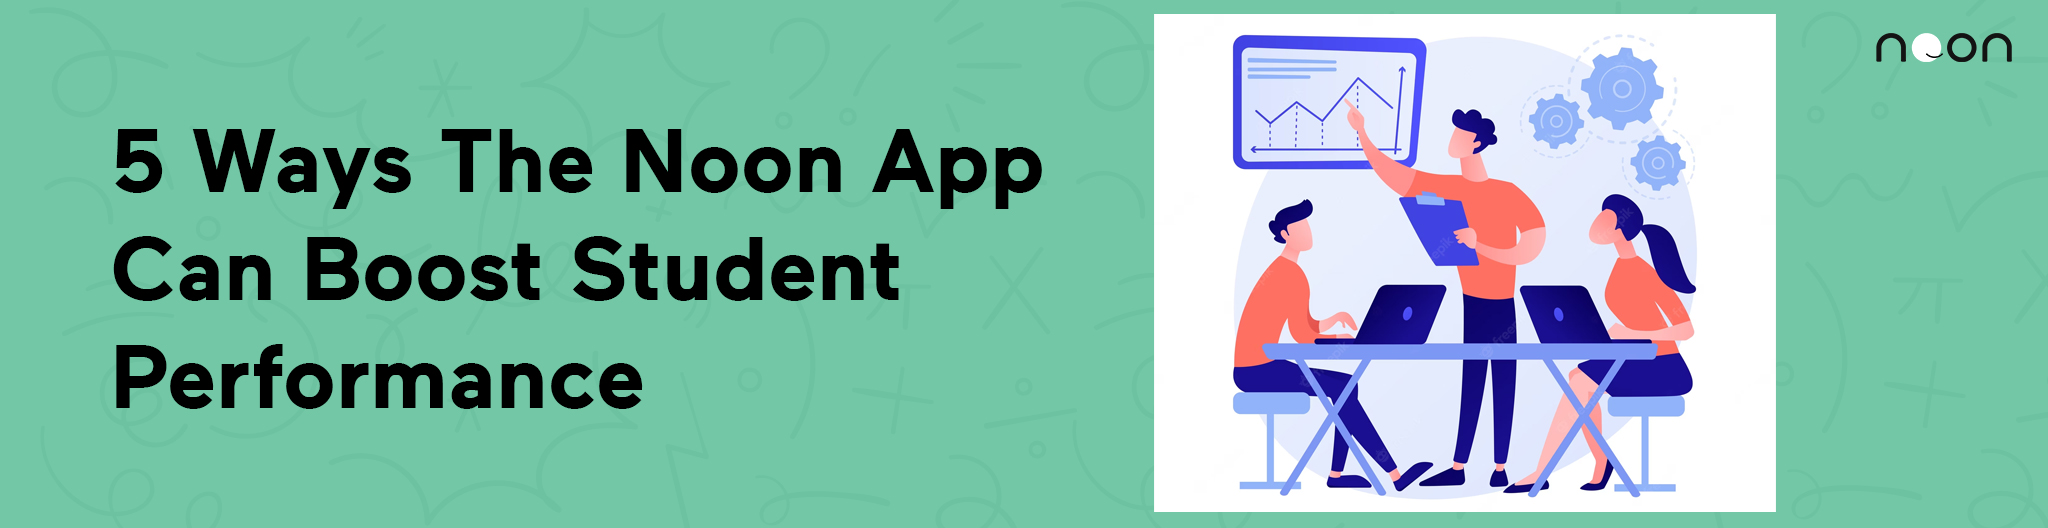 5 Ways The Noon App Can Boost Student Performance